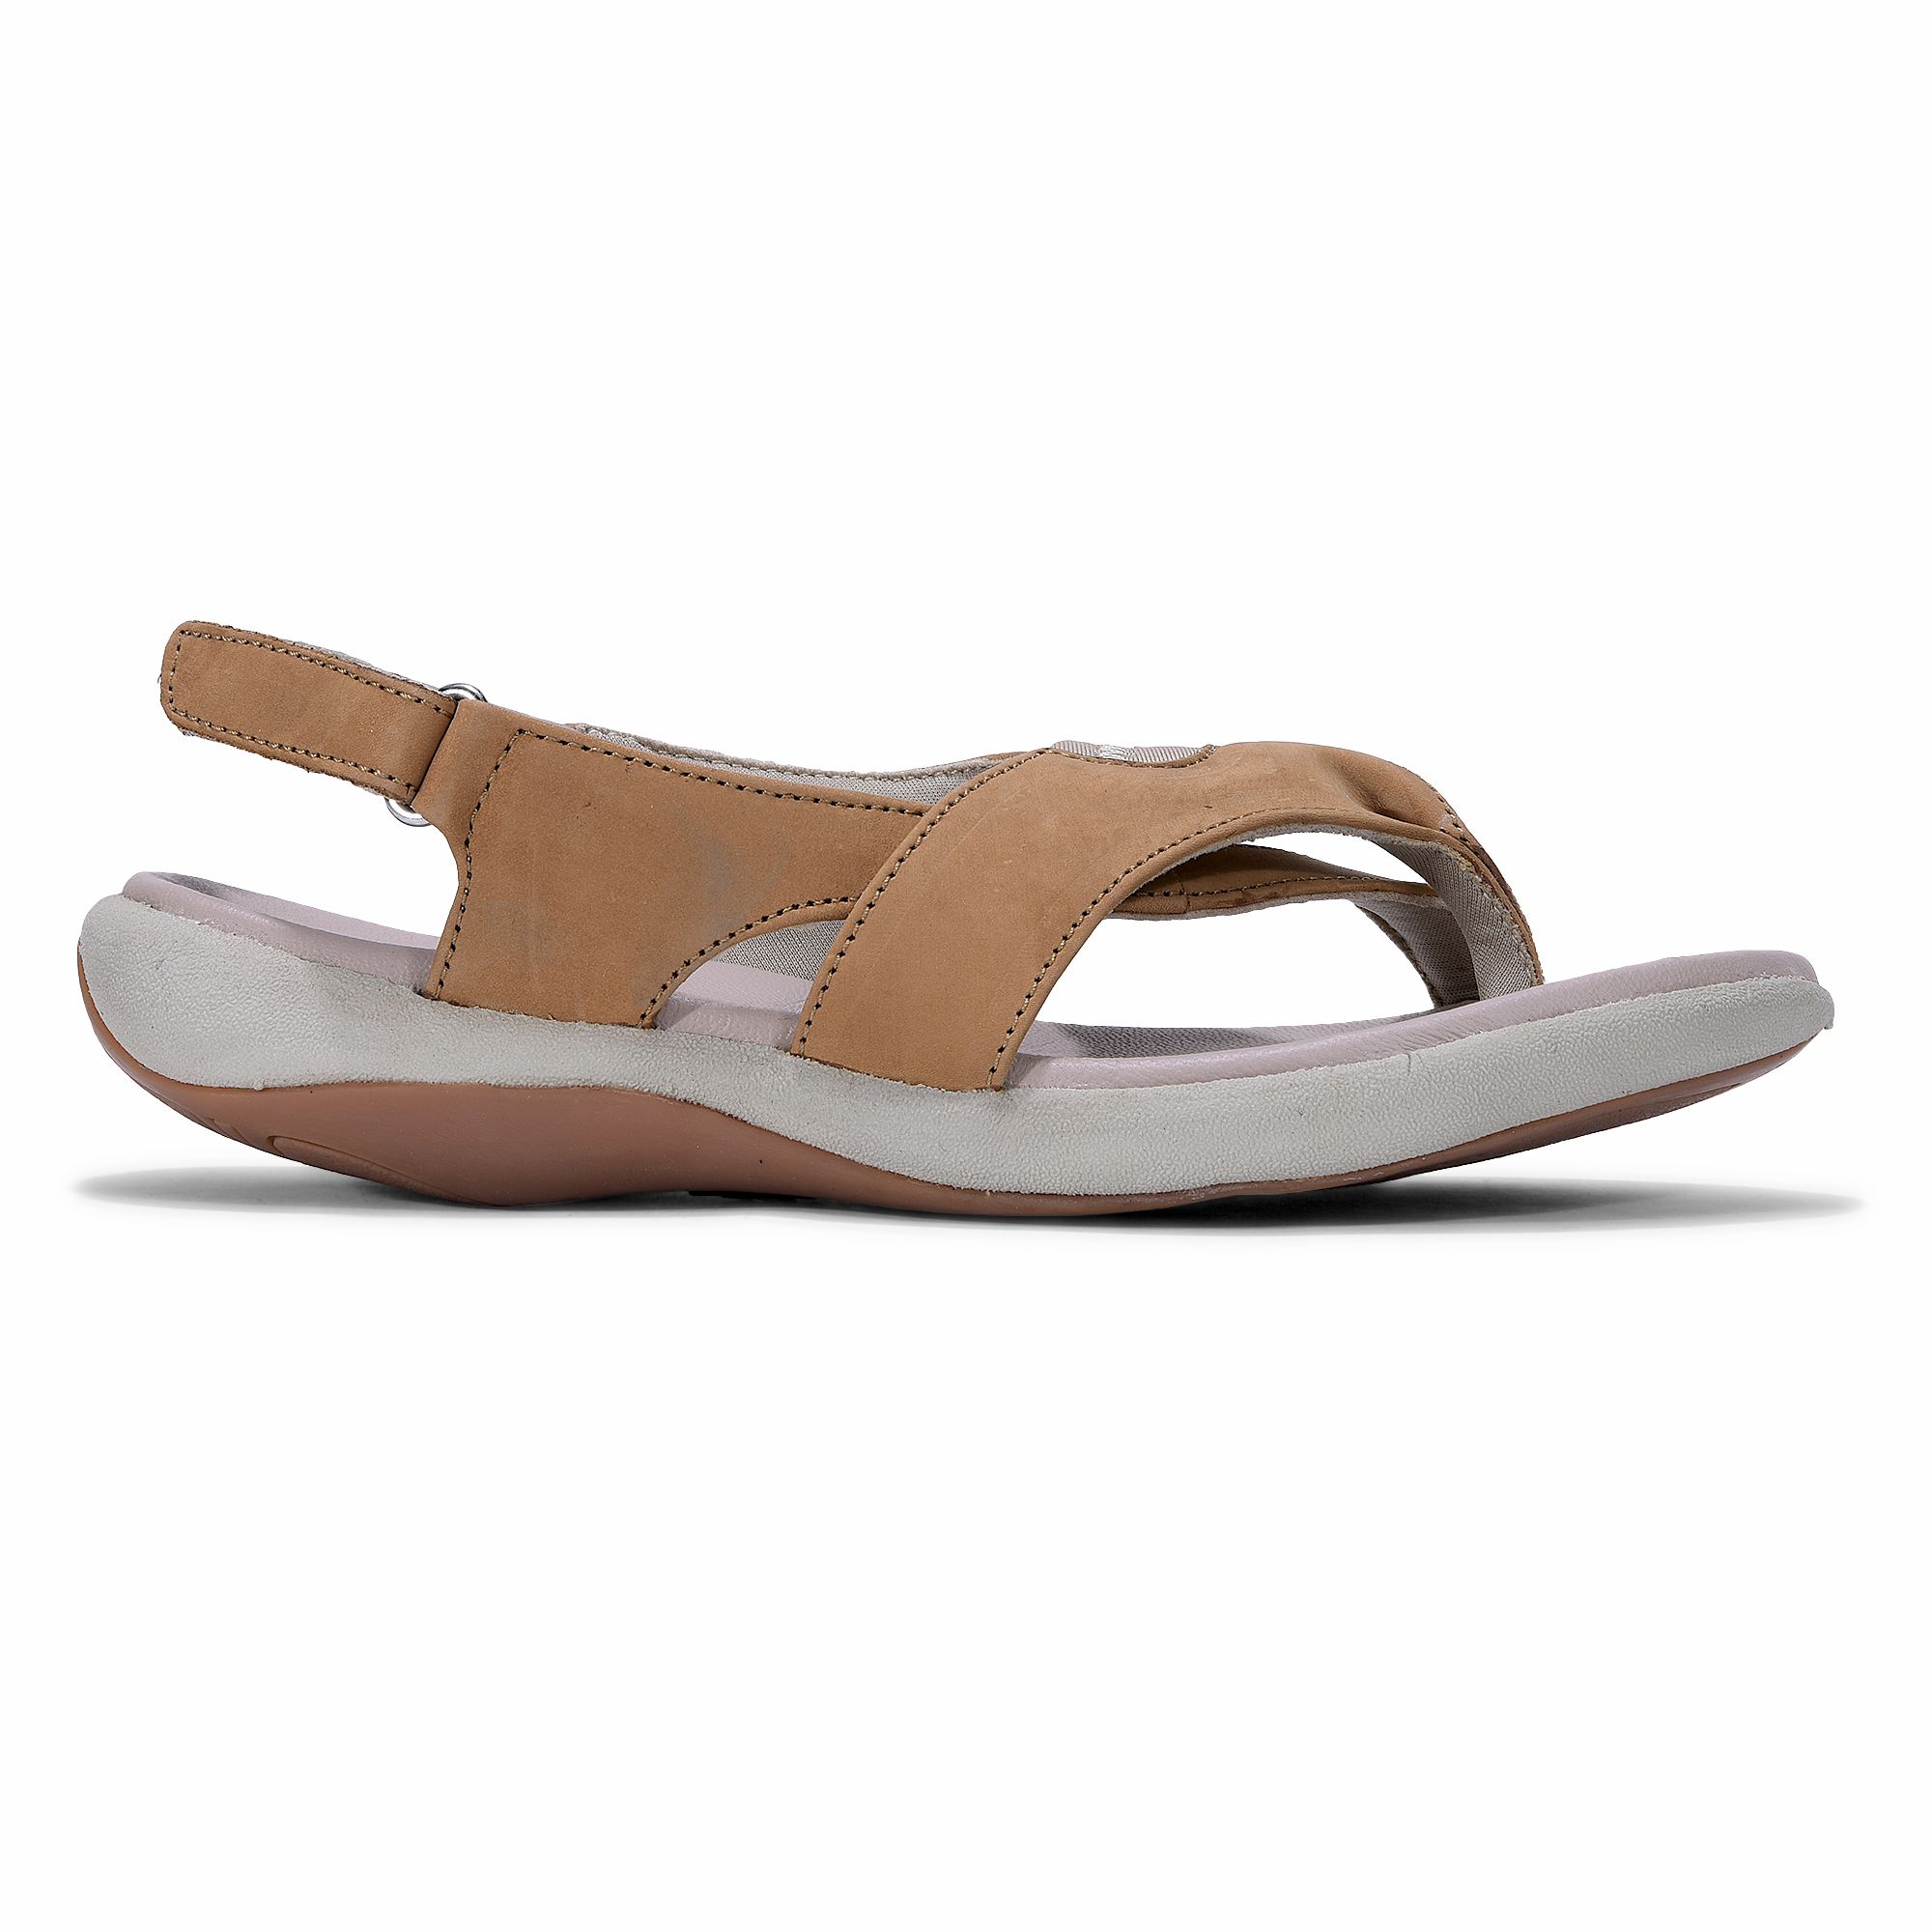 Experience more than 206 woodland sandals for women